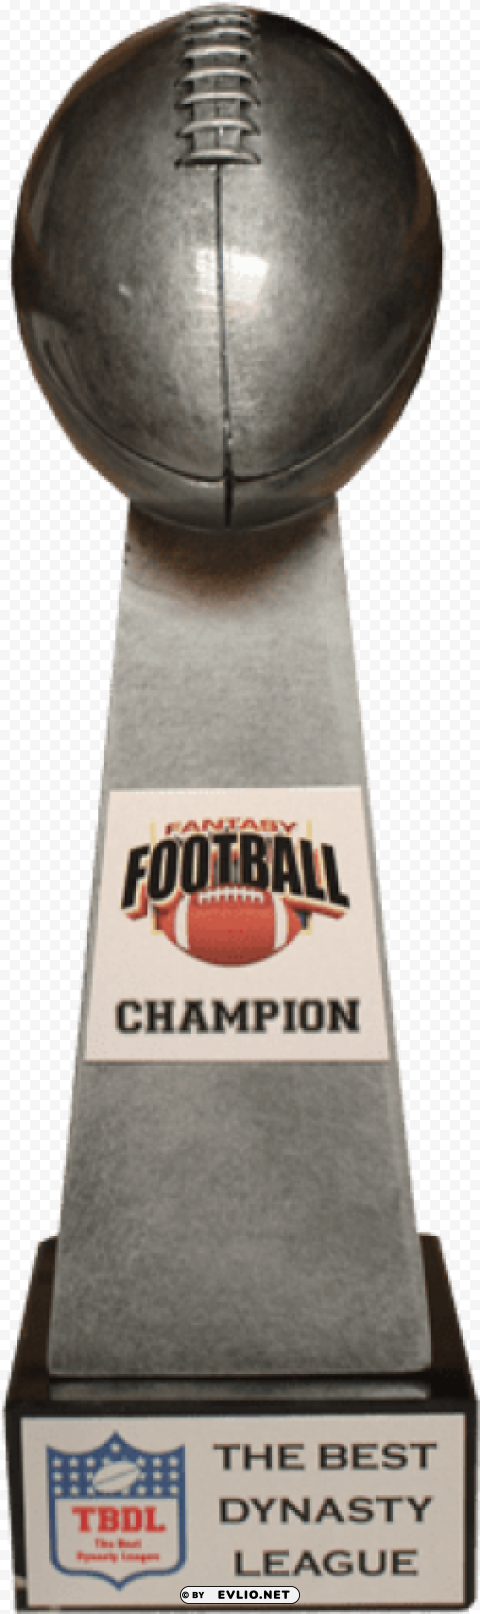 fantasy football trophy Isolated Object on Transparent Background in PNG